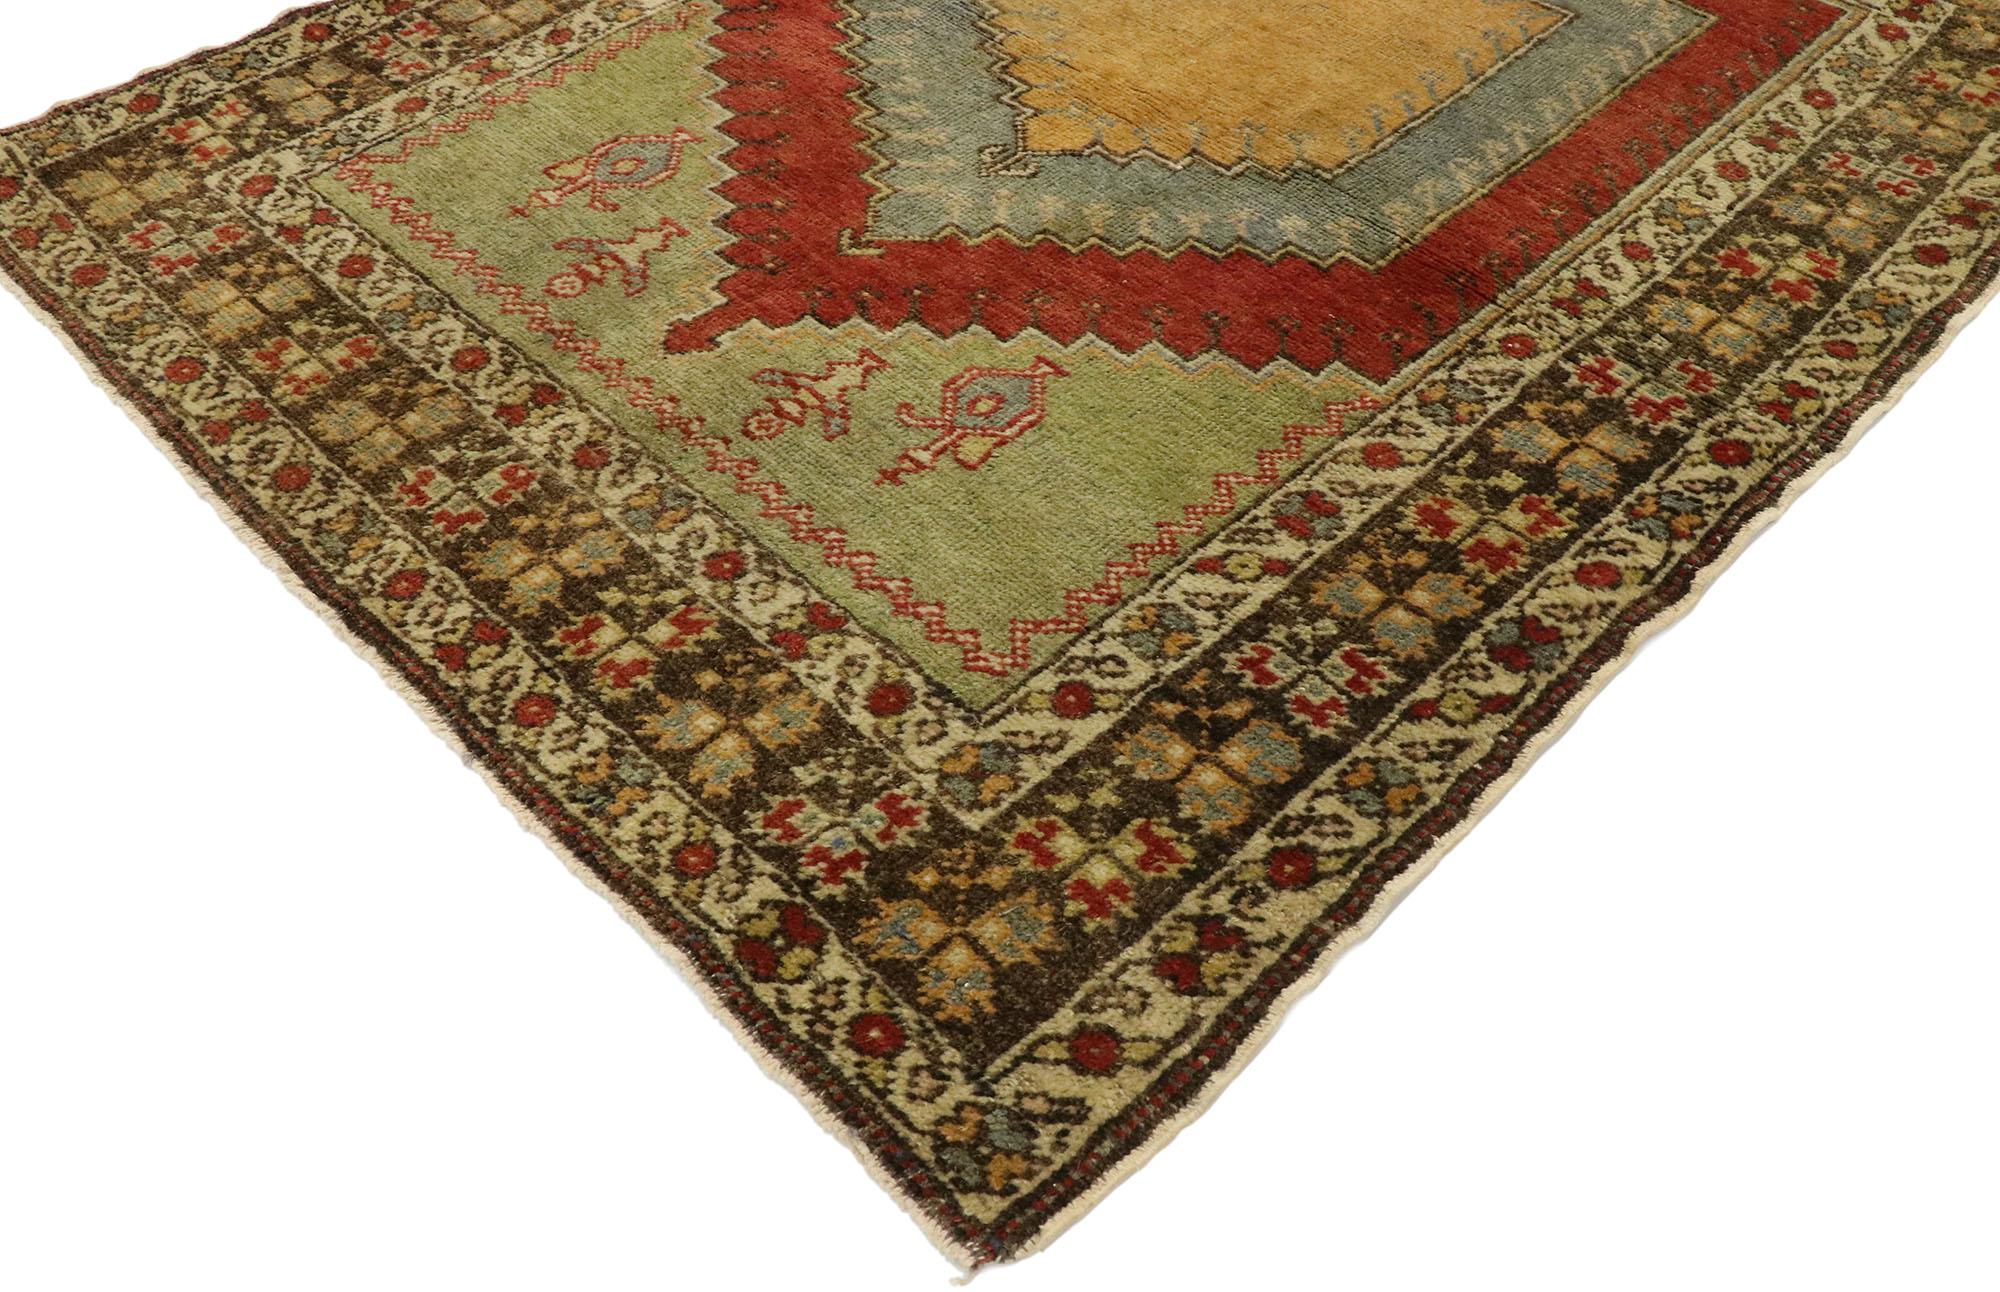 53092 vintage Turkish Oushak Prayer rug with Craftsman style. With its luminous warm hues and beguiling beauty, this hand knotted wool vintage Turkish Oushak prayer rug is immersed in Anatolian history. It features a concentric mihrab niche with